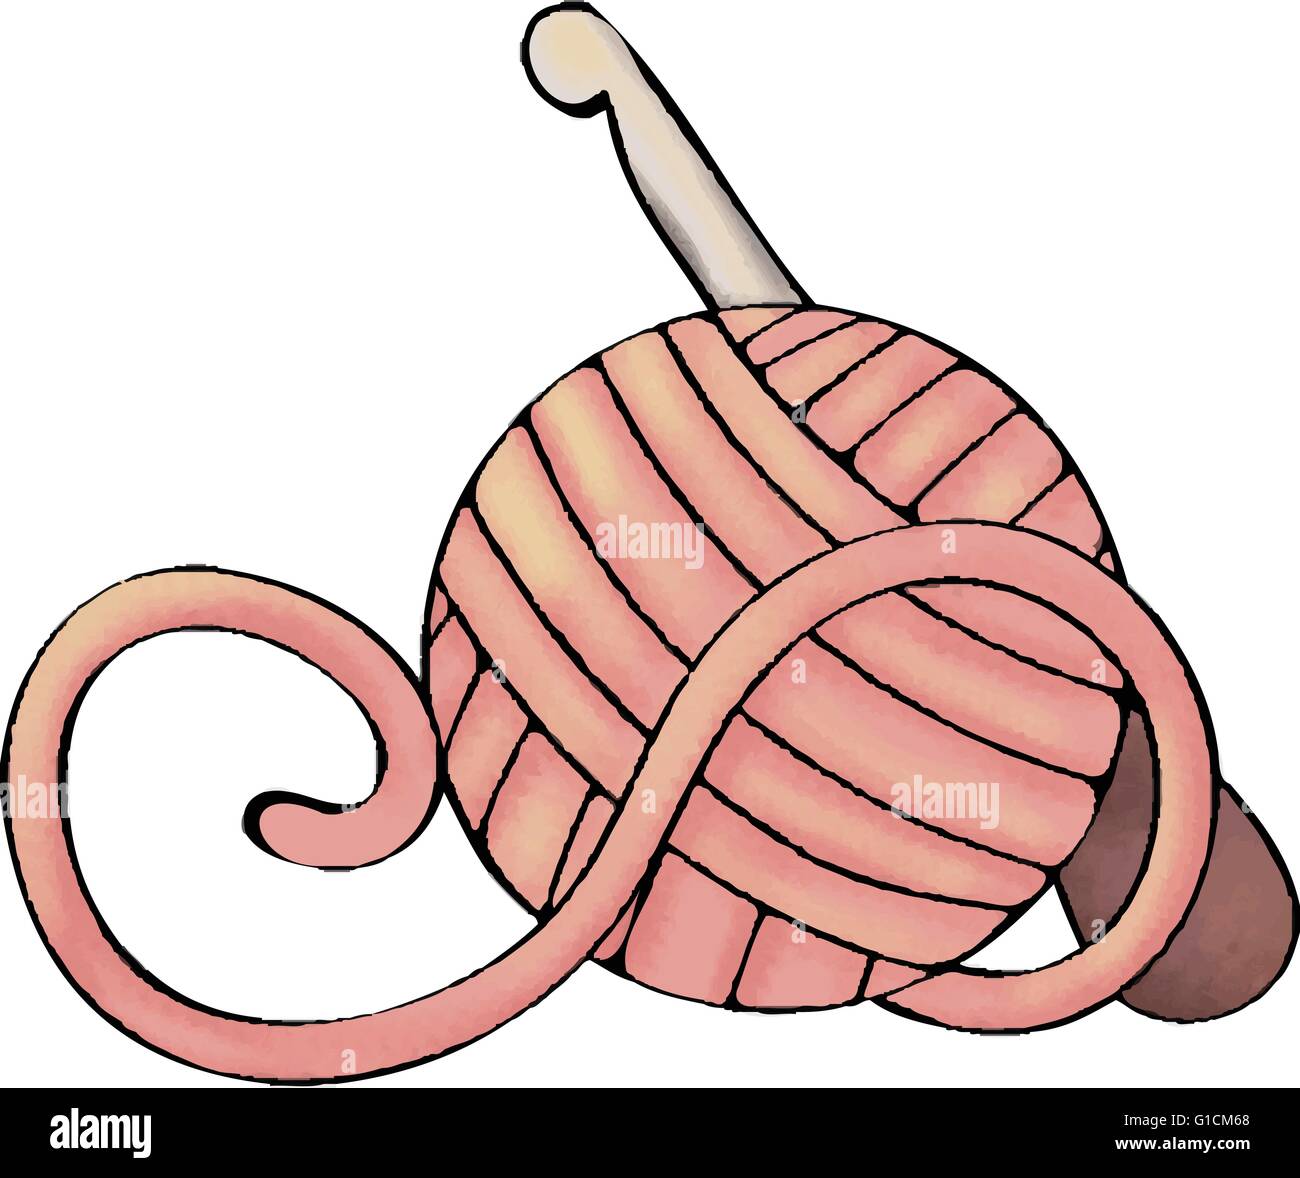 Free Clipart - Ball of Yarn and Crochet Hook or Needle  Crochet stitches  for beginners, Crochet hack, Easy crochet stitches